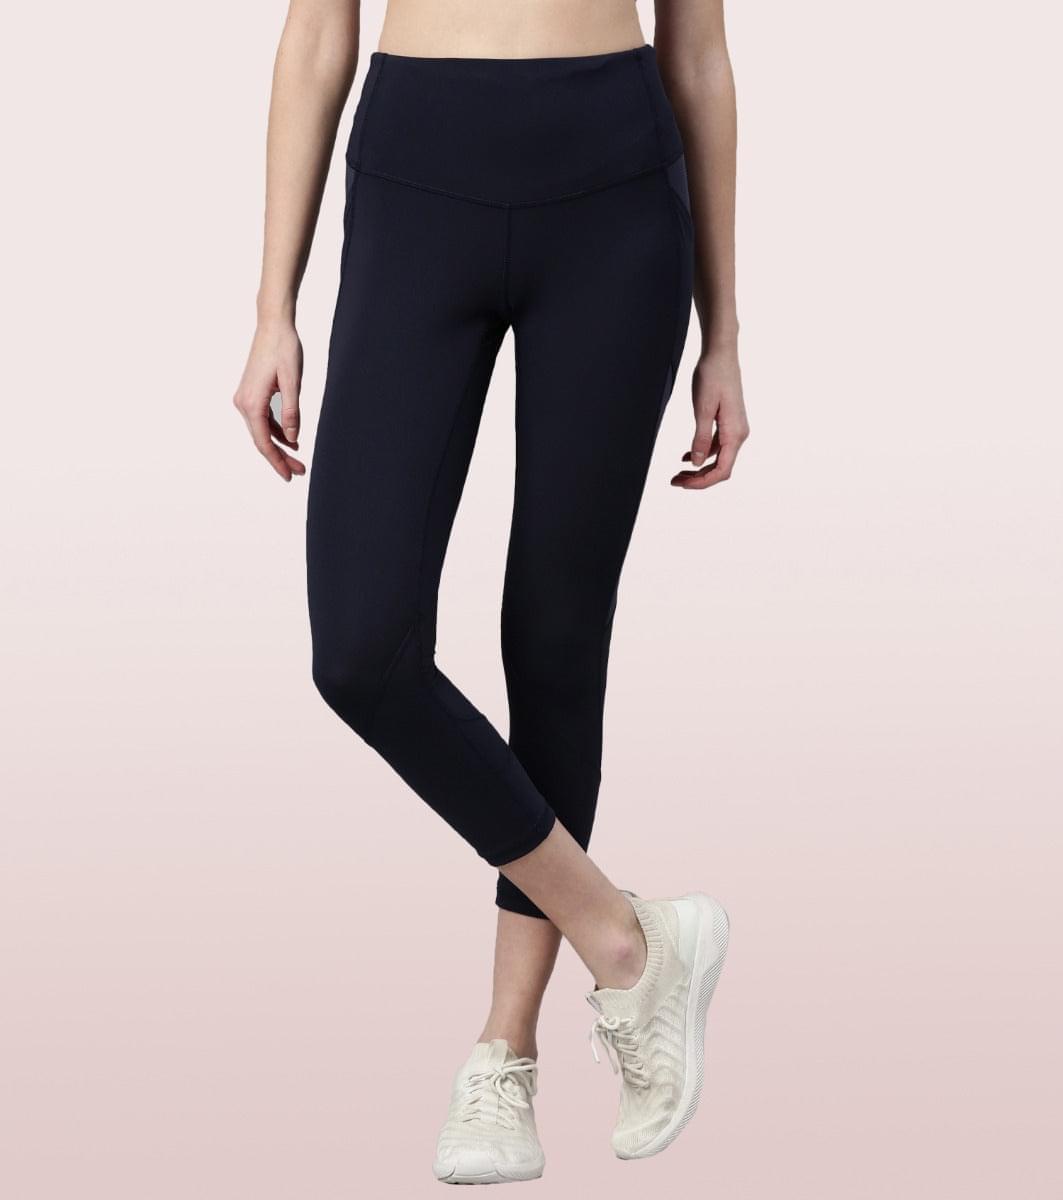 Enamor Women's Athleisure Relaxed Fit Mid-Rise Capri Yoga Pant – Online  Shopping site in India